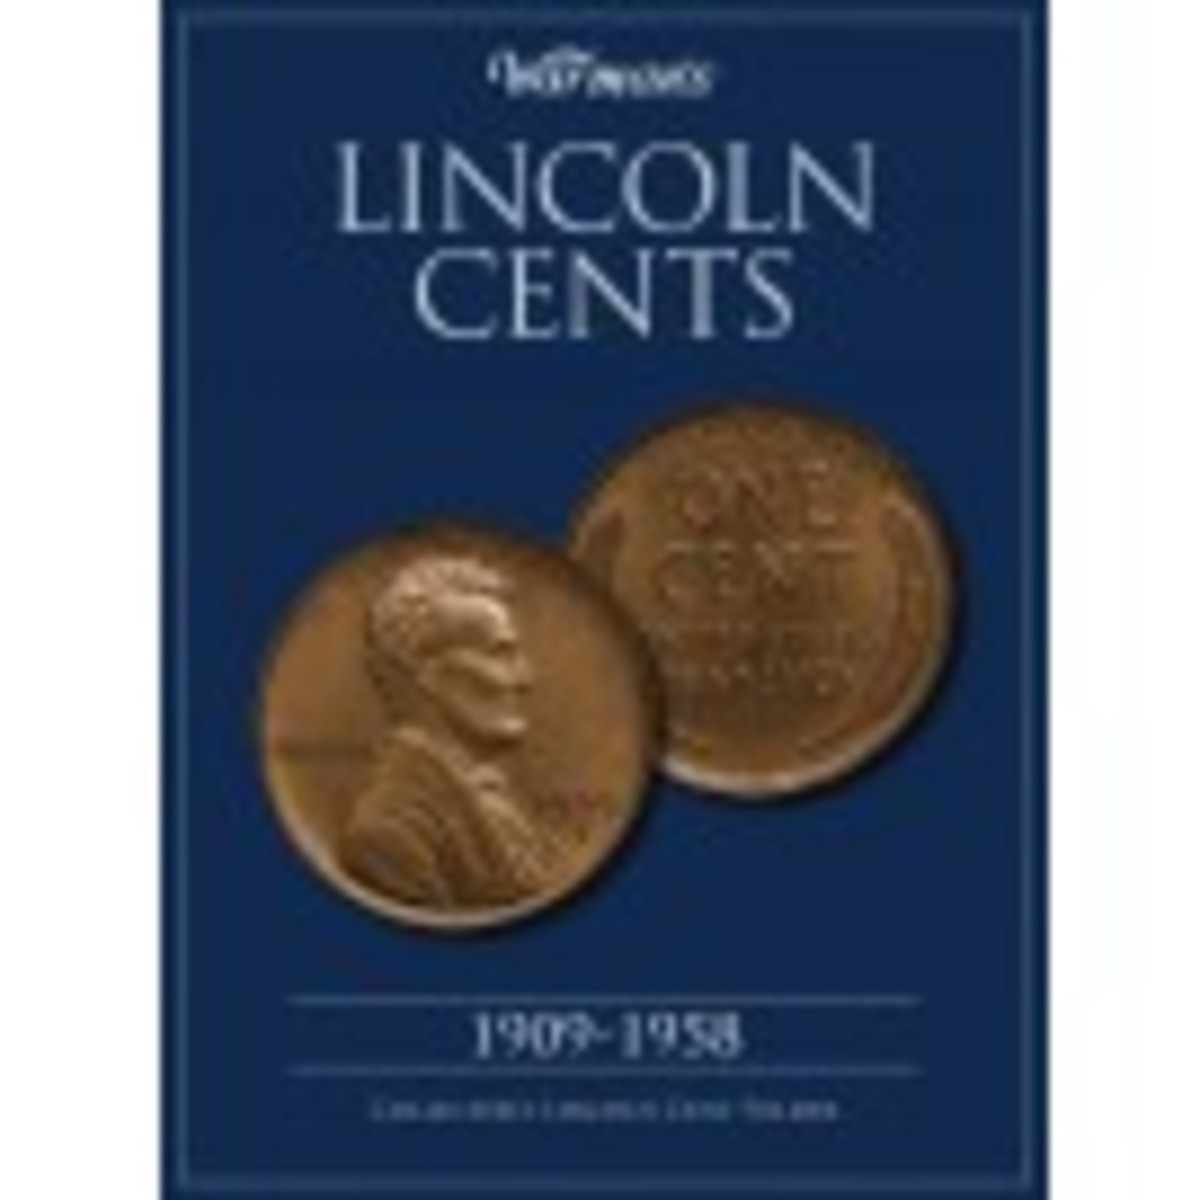 Lincoln Cent 1909-1958 Collector's Folder